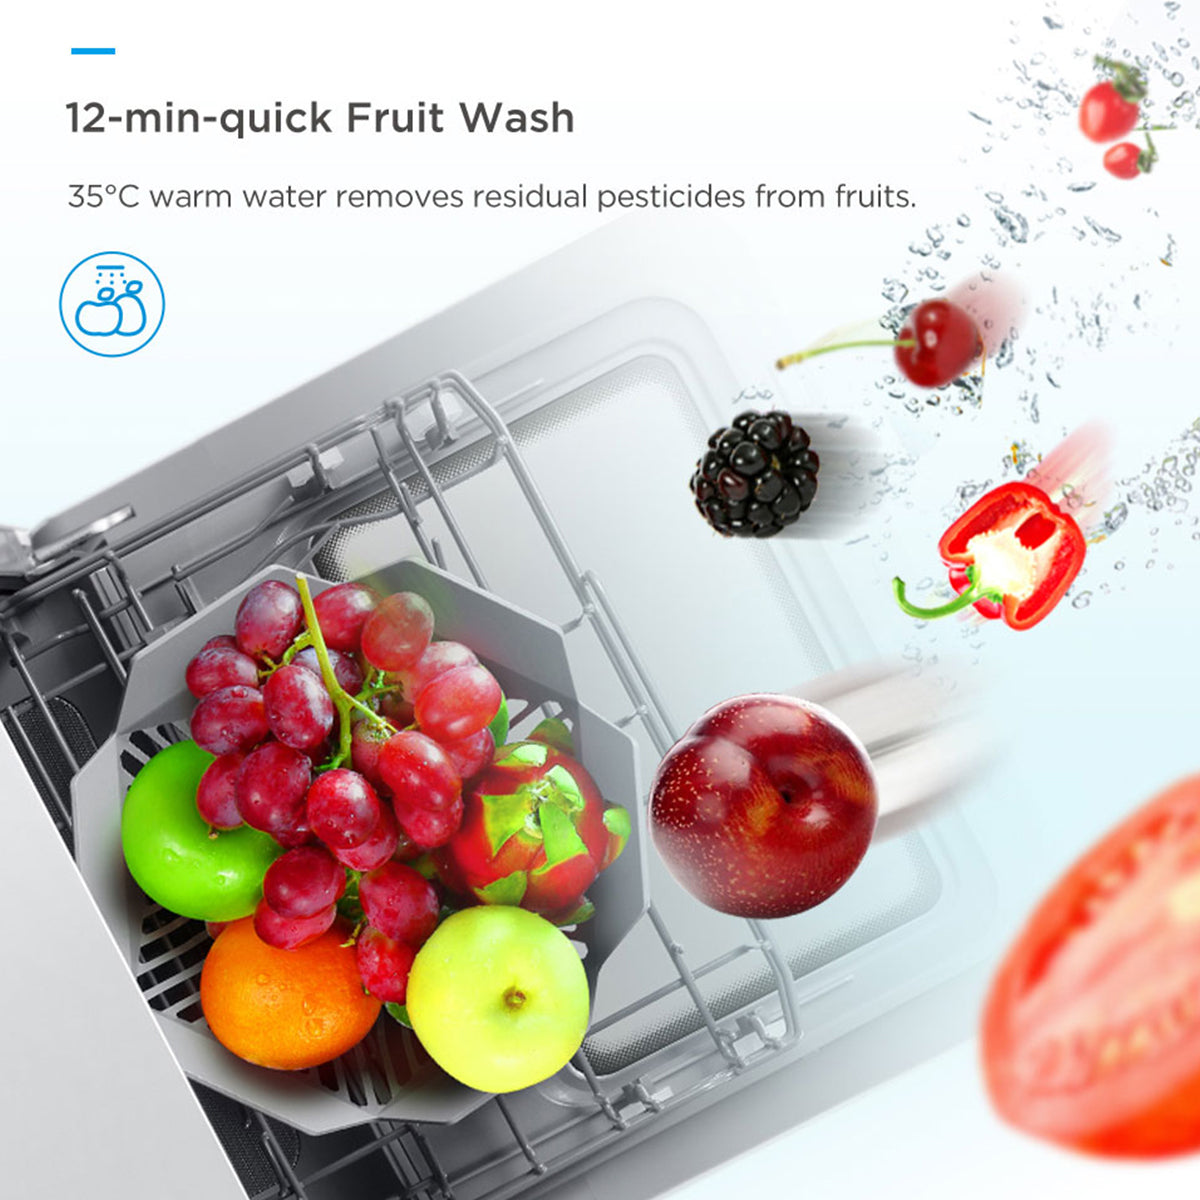 Midea 3rd Gen Benchtop Mini Dishwasher Multifunctional 3 Place Dish Washing Latest Version Water Tray Included